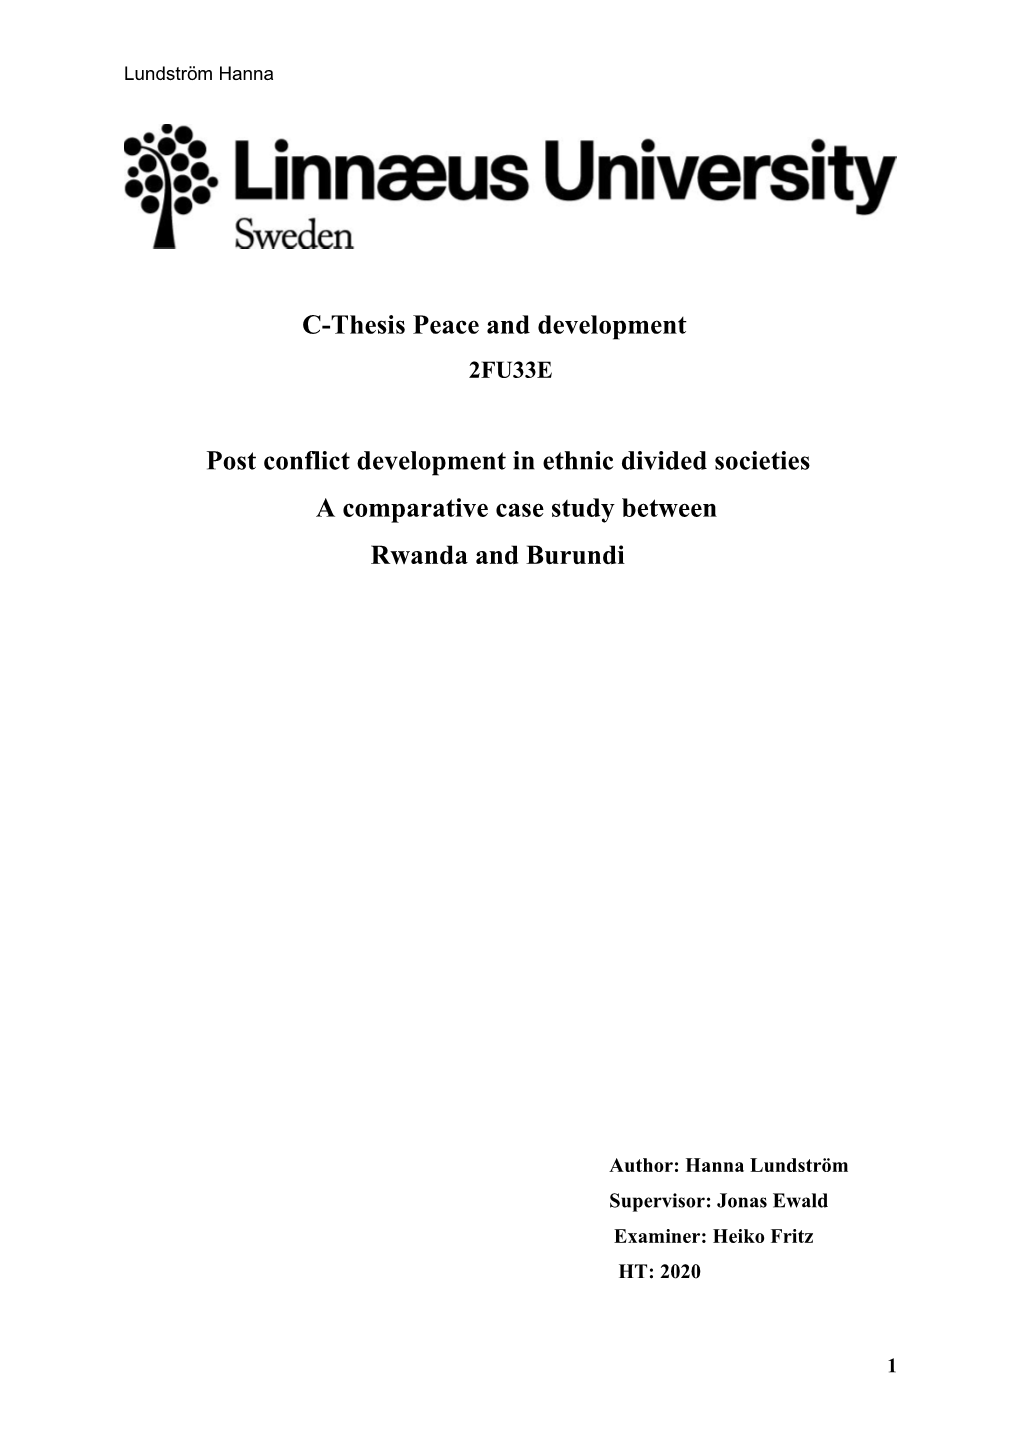 C-Thesis Peace and Development Post Conflict Development in Ethnic